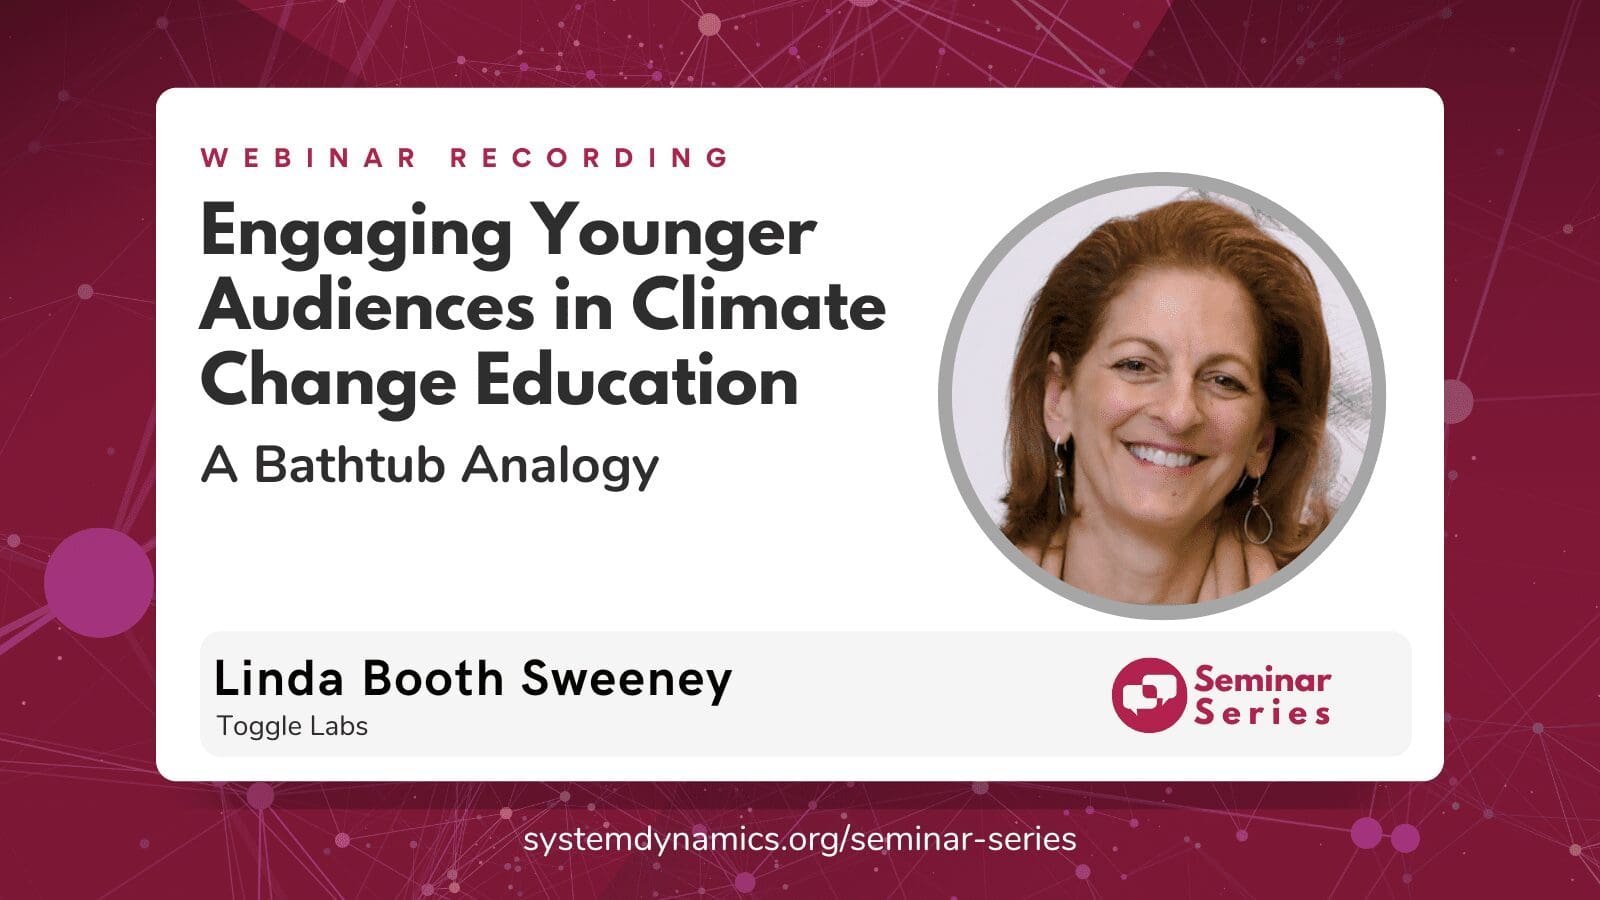 Engaging Younger Audiences in Climate Change Education